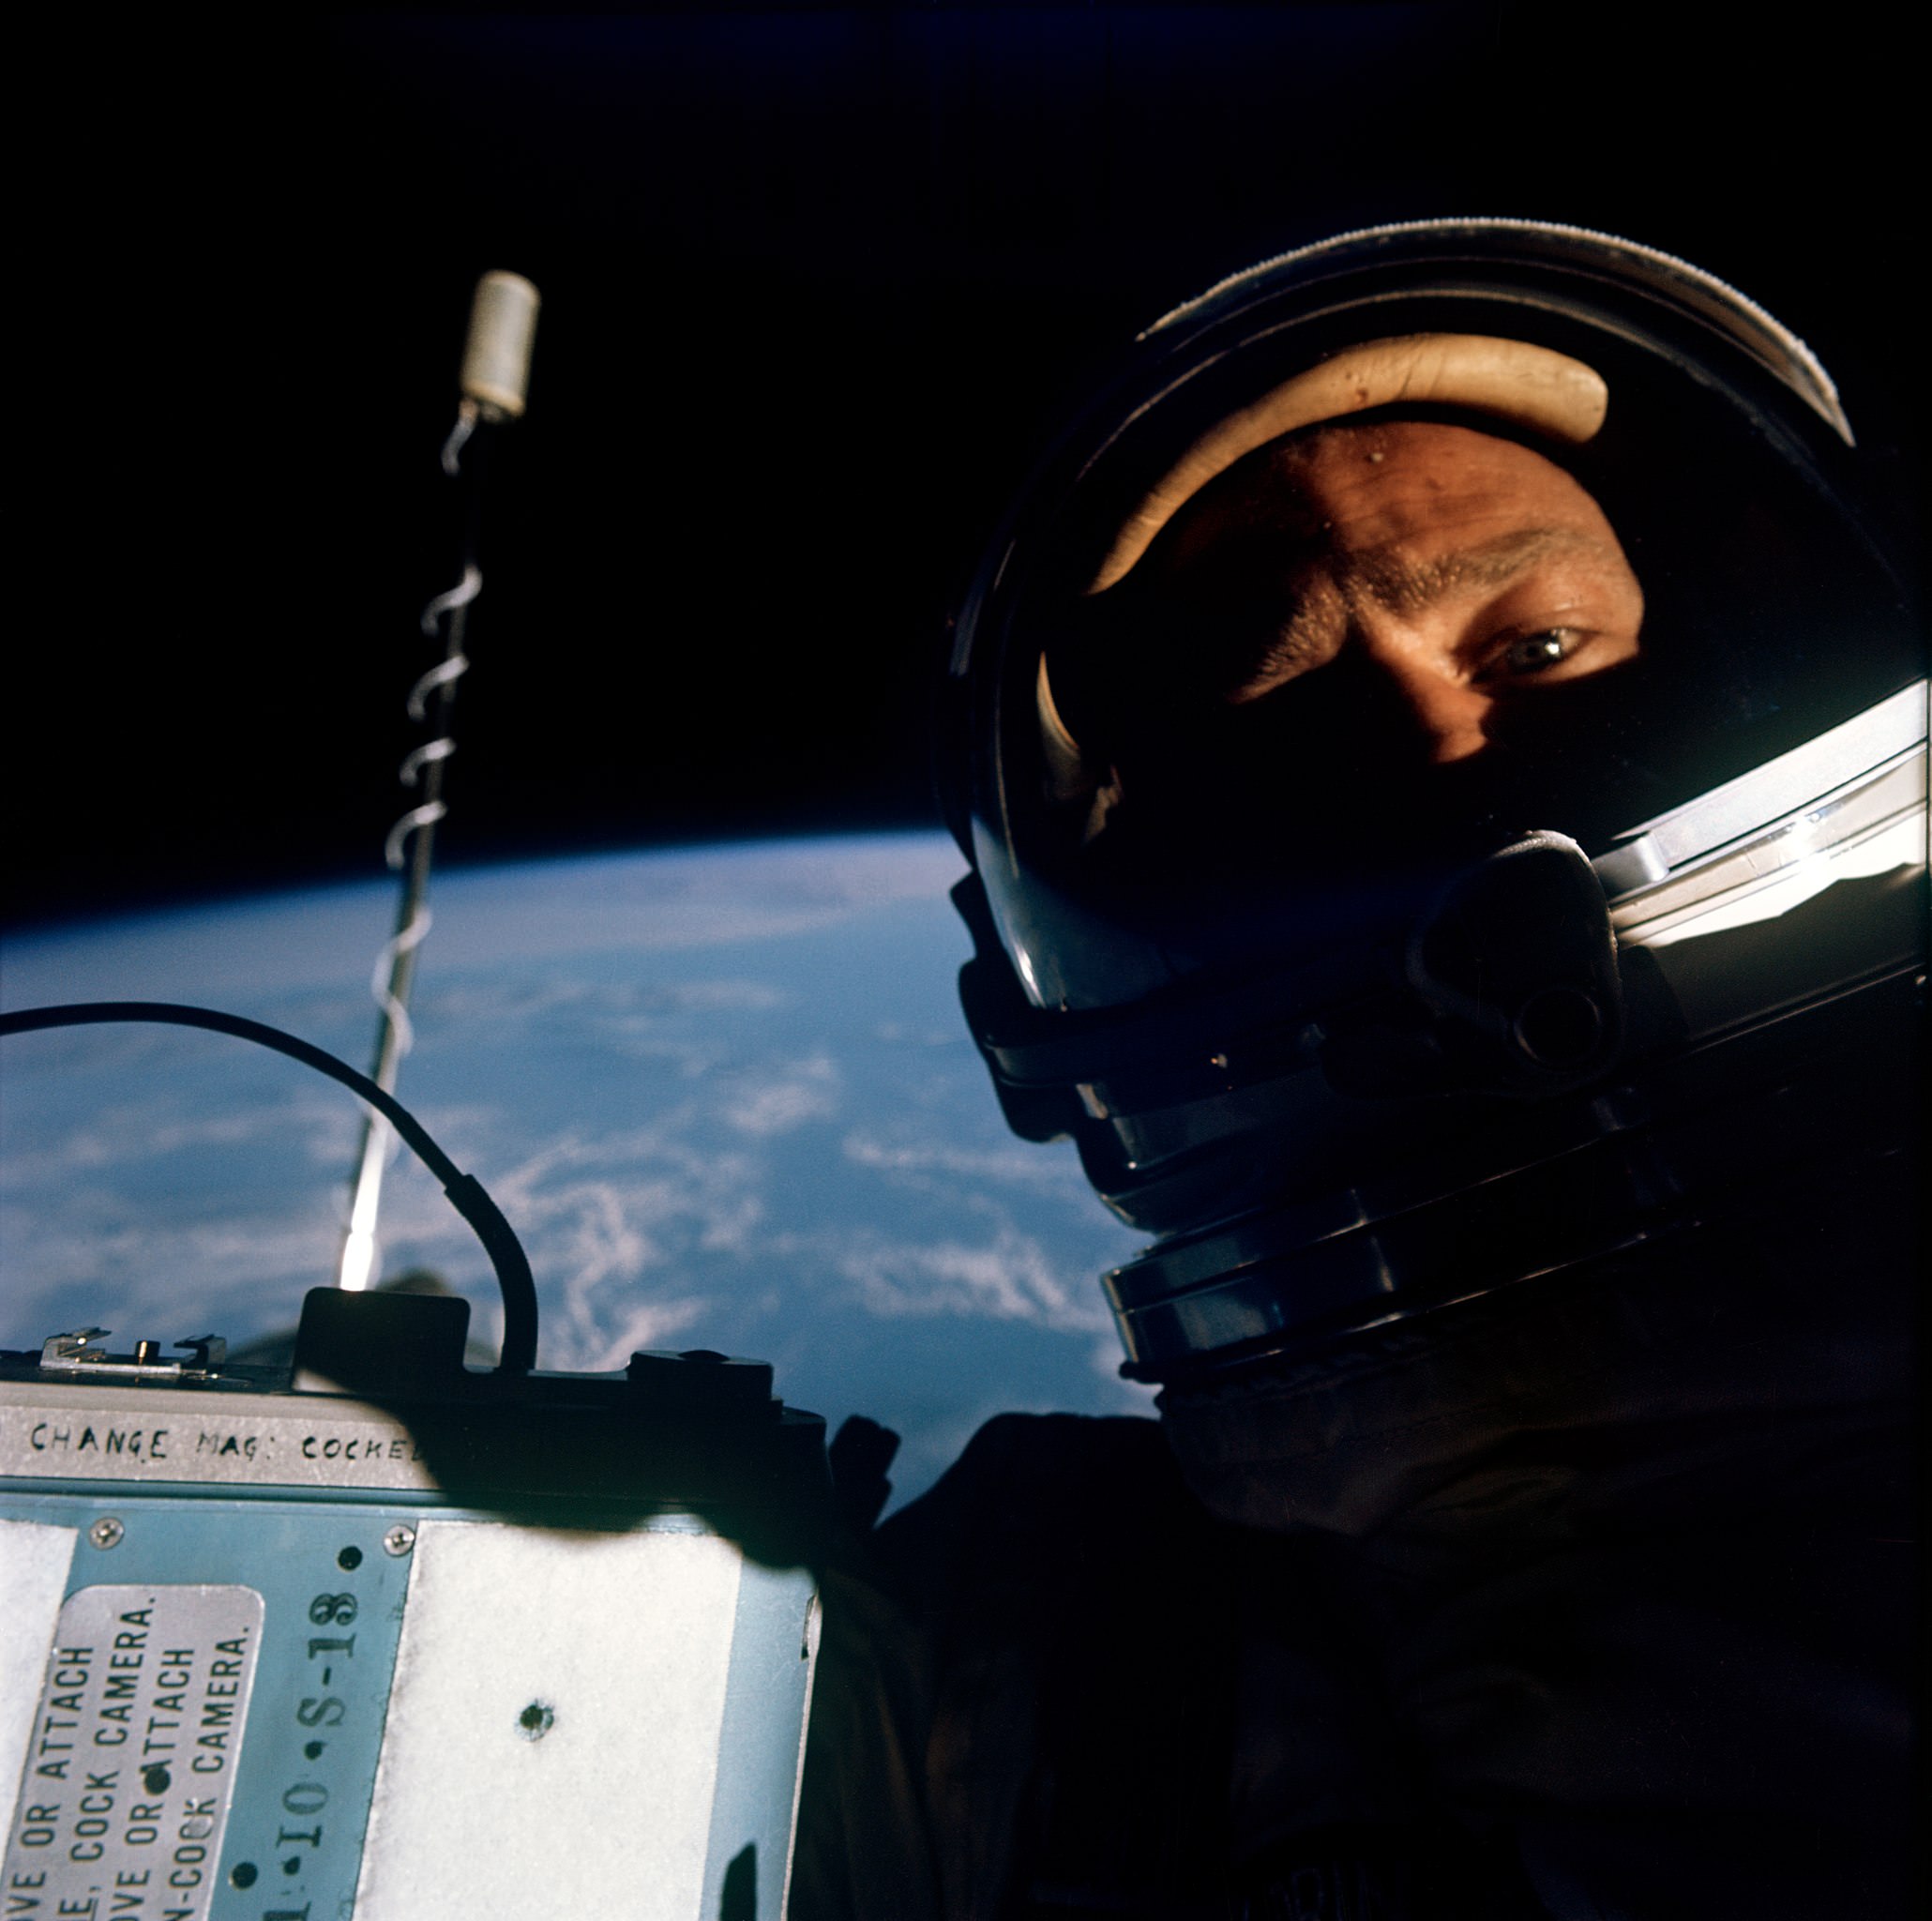 Interesting Story Behind Buzz Aldrin's First Ever Space Selfie Taken on Gemini 12 Mission